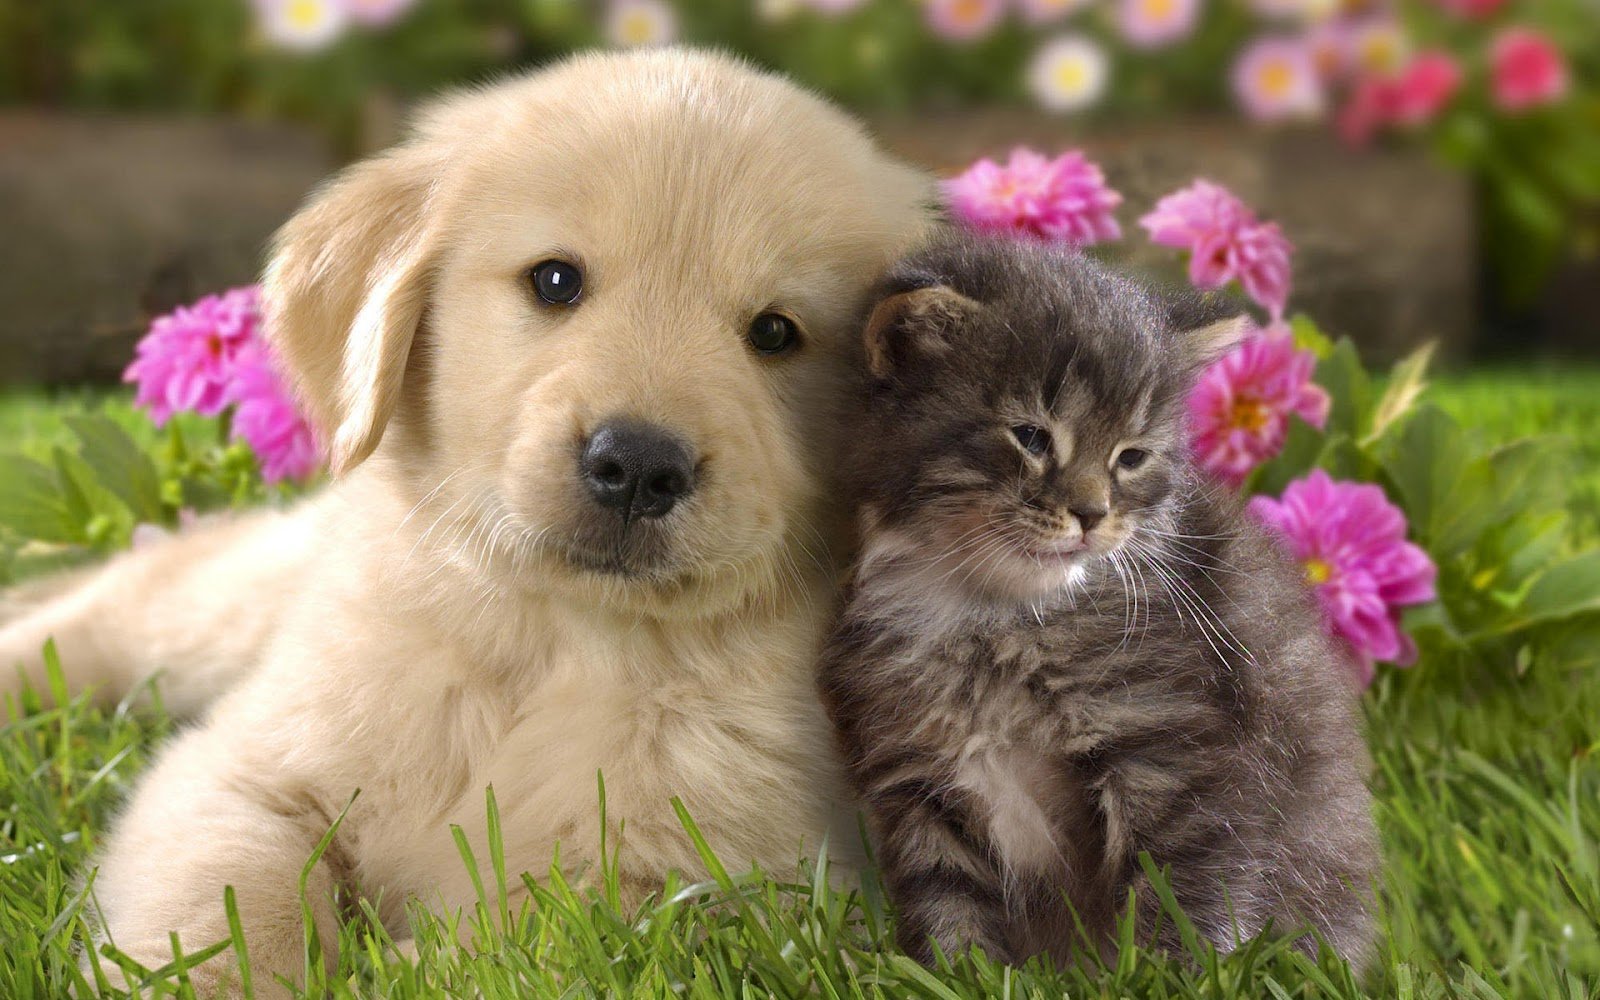  cute cat and dog cuddling HD cats and dogs wallpapers   backgrounds